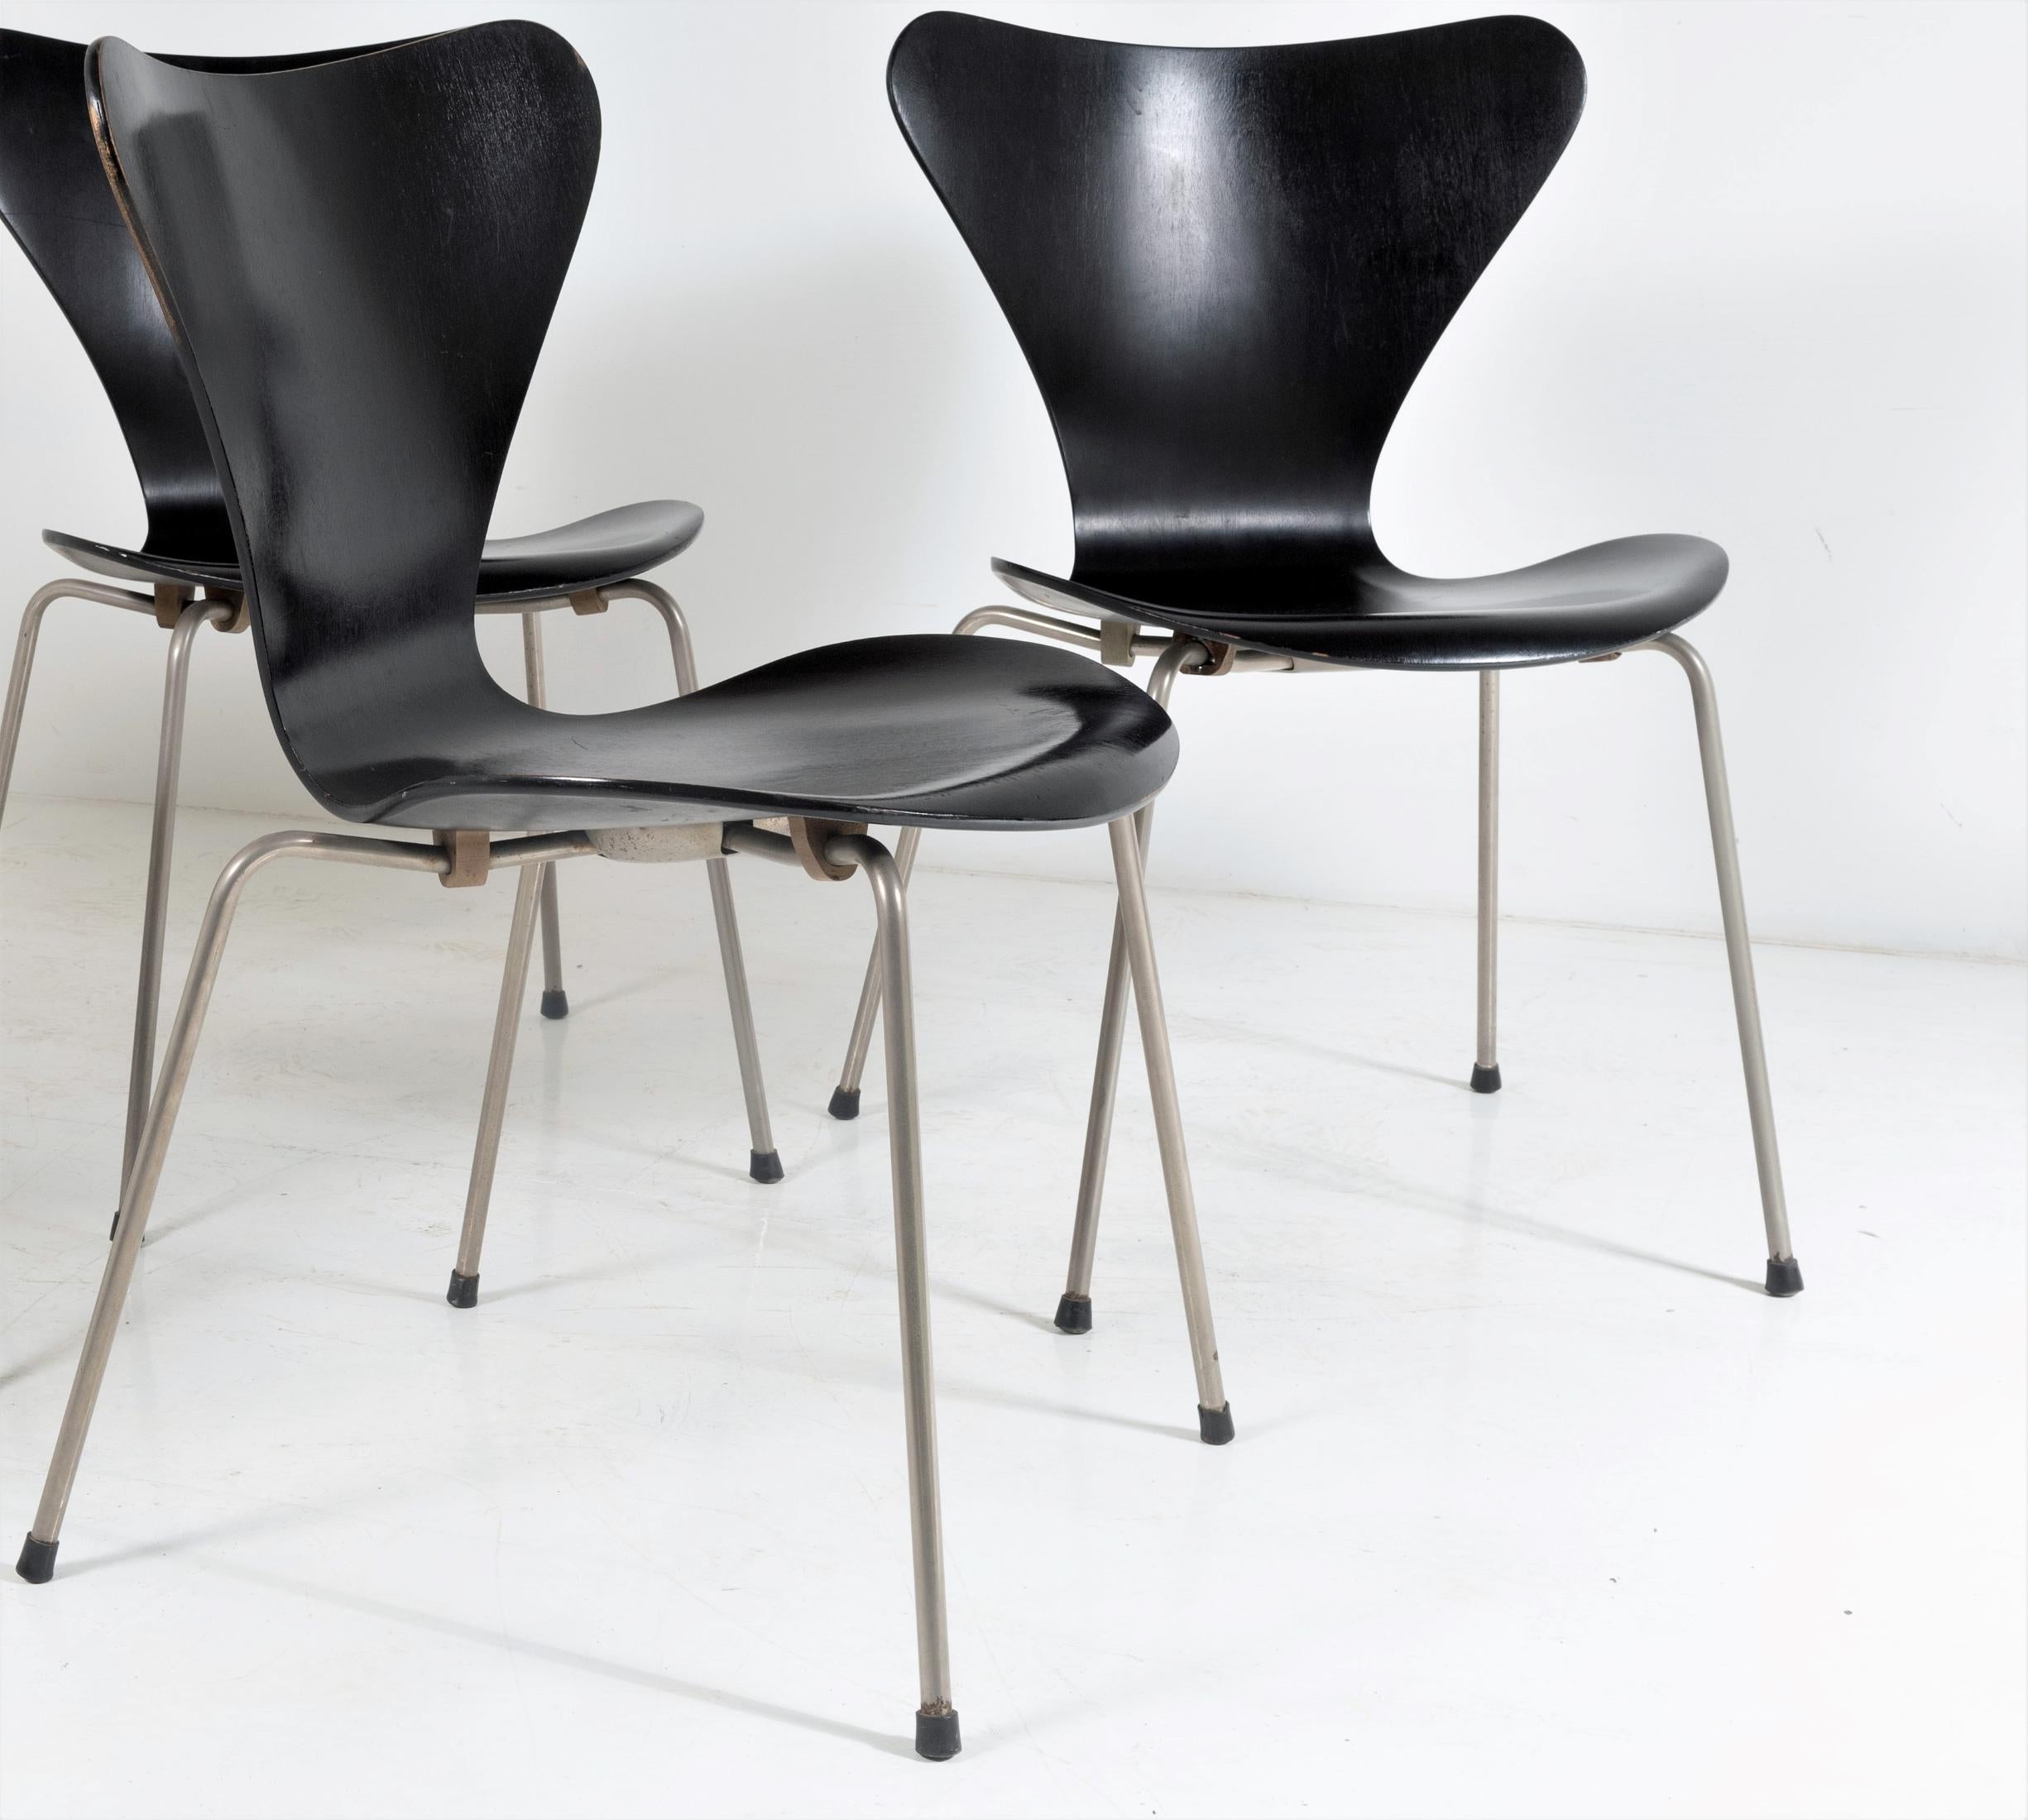 A set of four original Arne Jacobsen Syveren chairs (Model 3107) manufactured by Fritz Hansen – Denmark. Originally designed in 1955 these are early edition chairs with wide metal base caps (later models were plastic).
These early designs have a